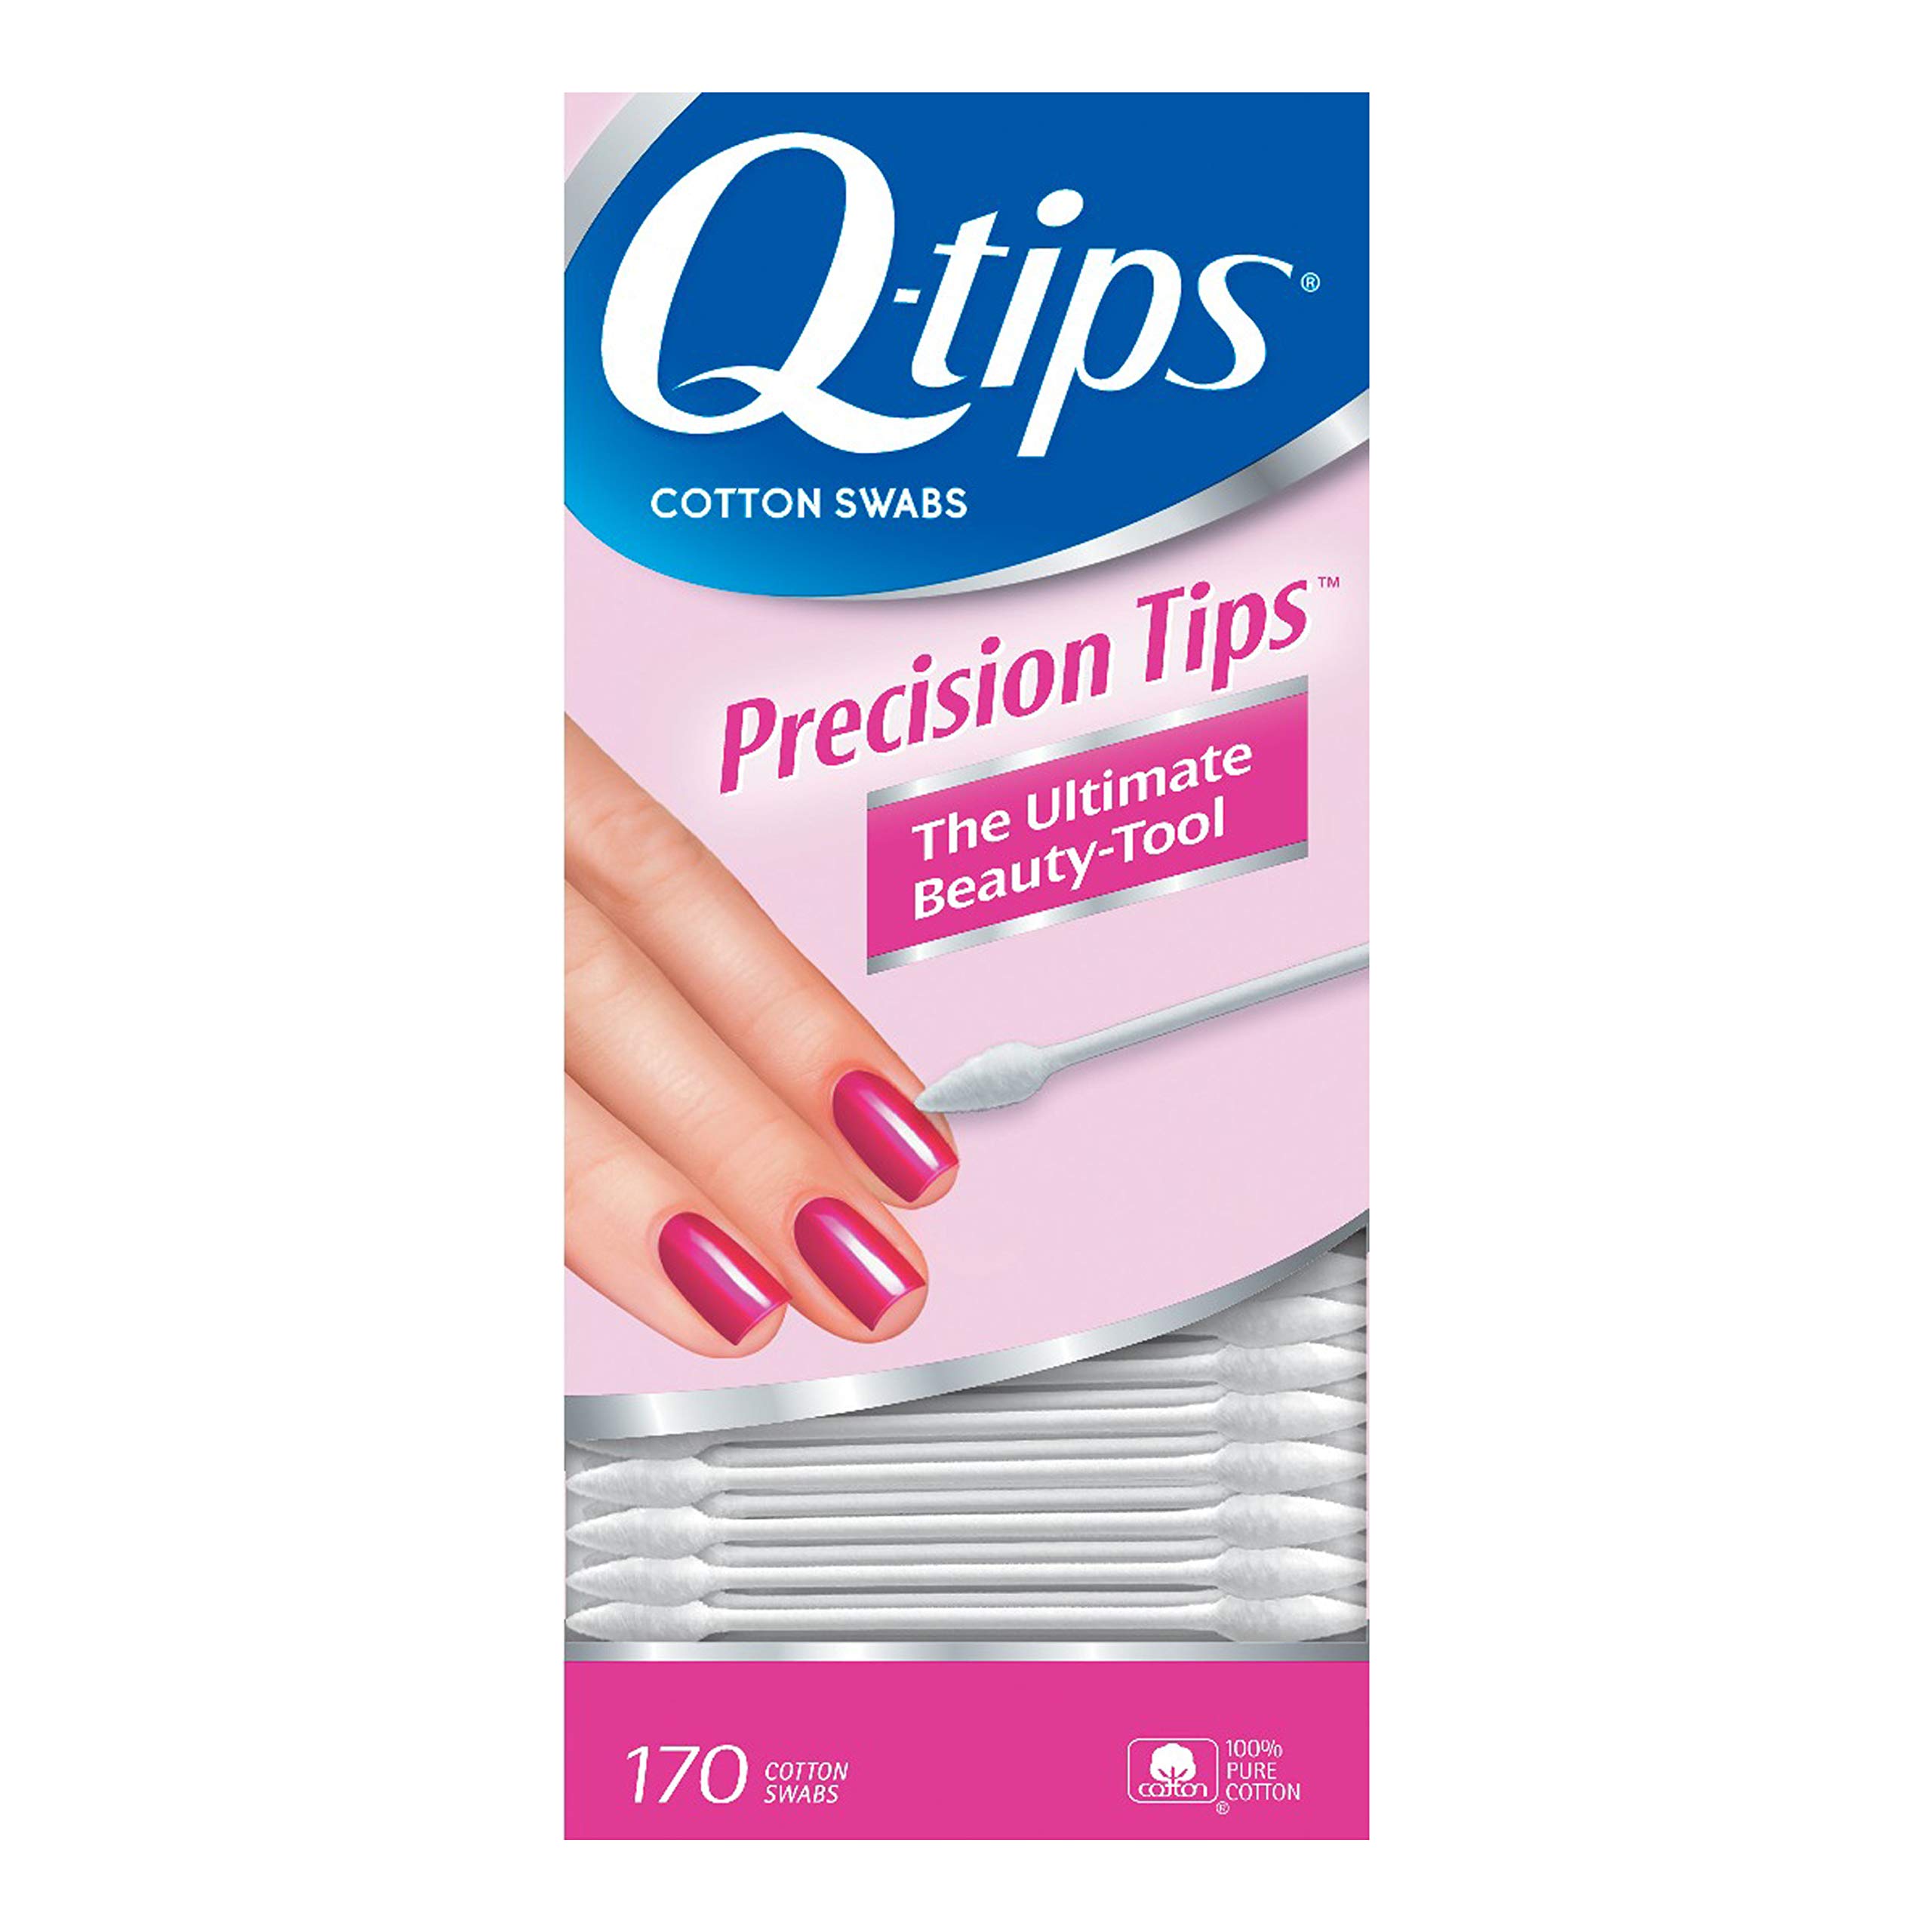 Q-tips Cotton Swabs For Hygiene and Beauty Care Q Tips Precision Cotton Tips Cotton Swab Made With 100% Cotton, 170 Count (Pack of 3)